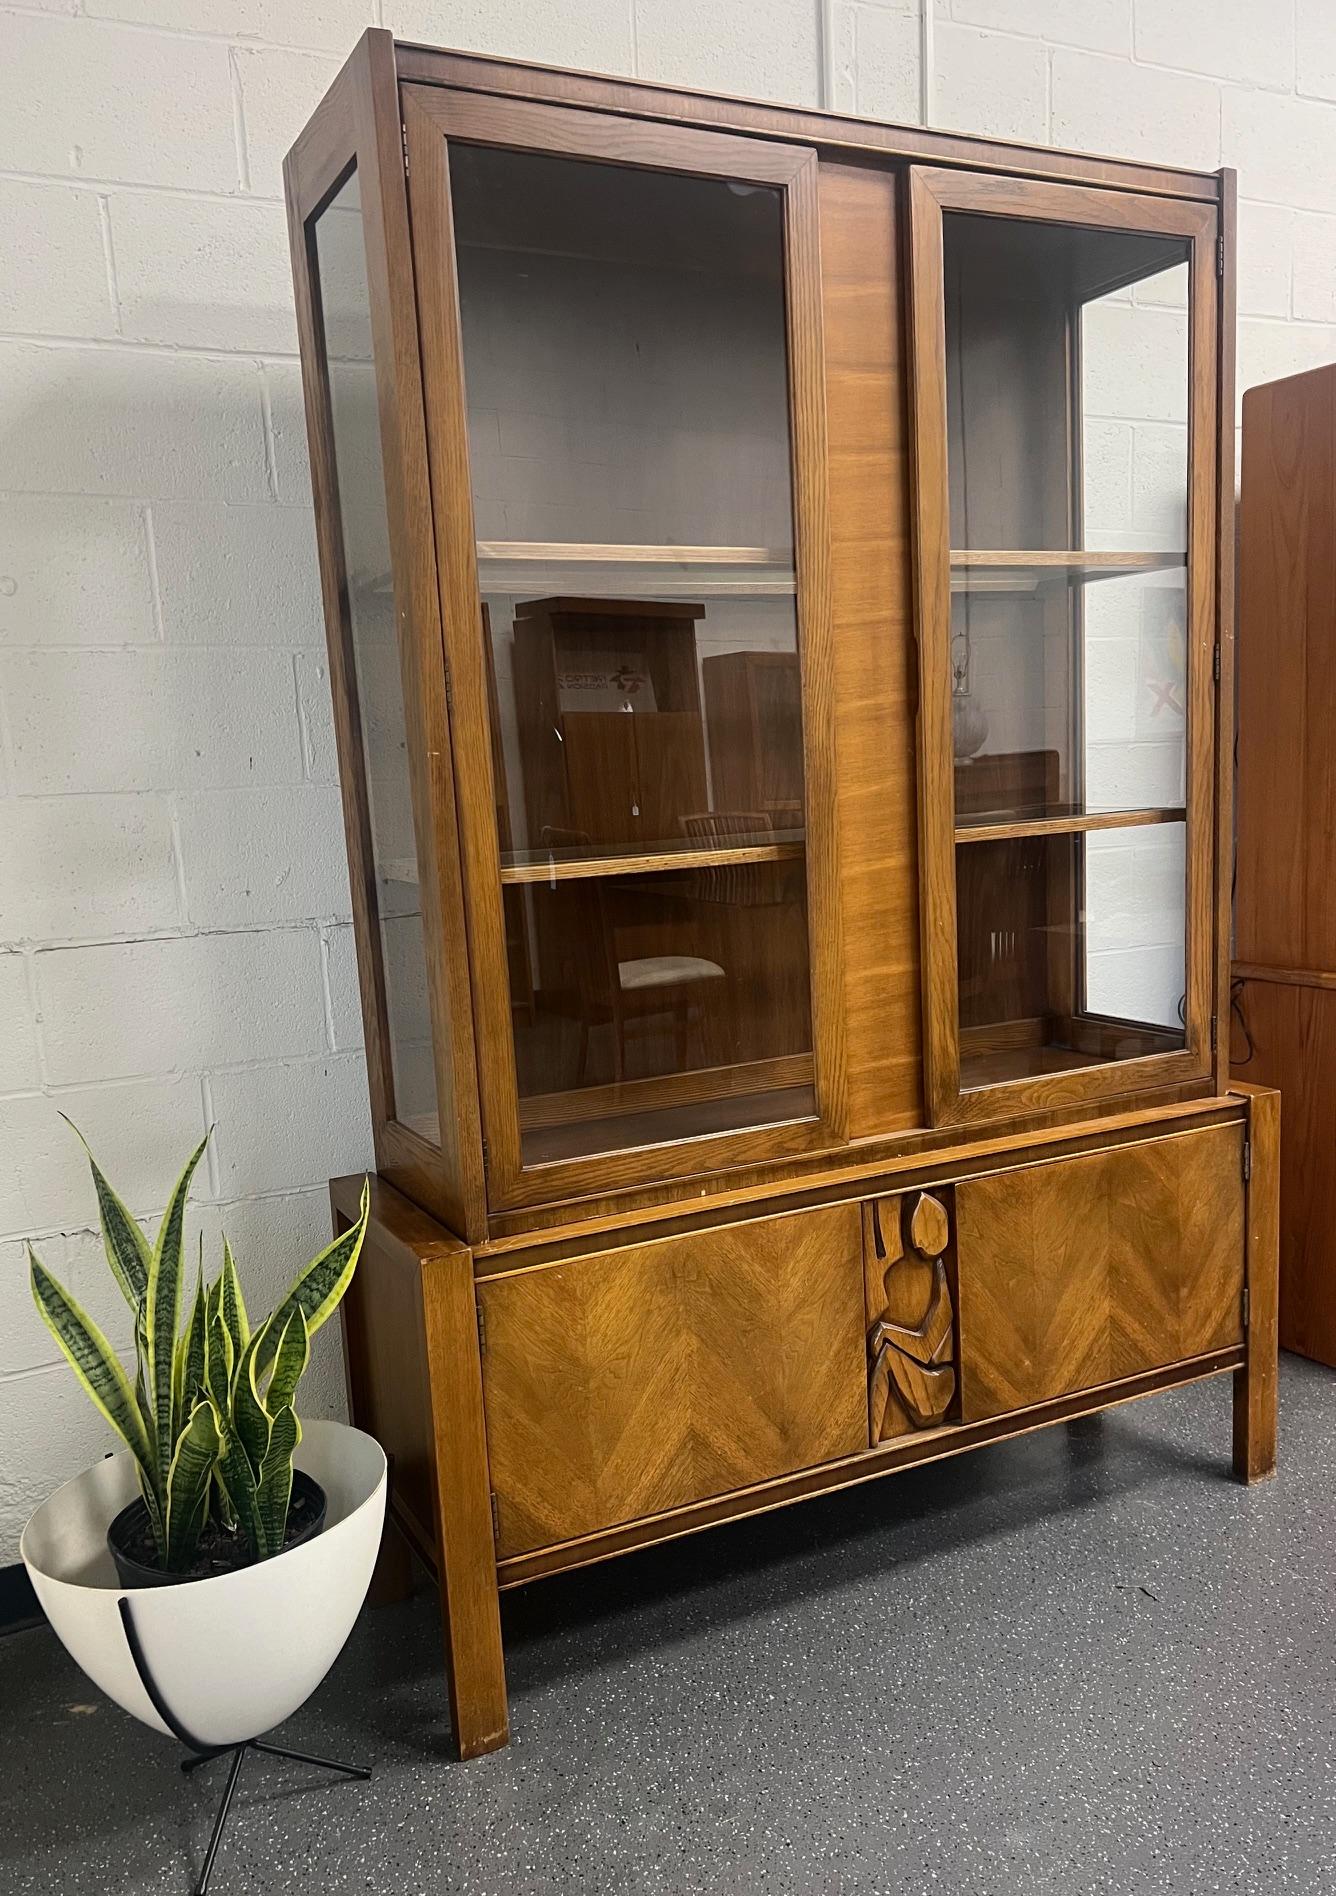 Gorgeous Tiki Brutalist buffet with hutch by United Furniture.

Featuring adjustable glass shelves at the top. Generous storage space and a drawer at the bottom. The top has a working light with a vintage plug.

Mostly excellent condition. Some